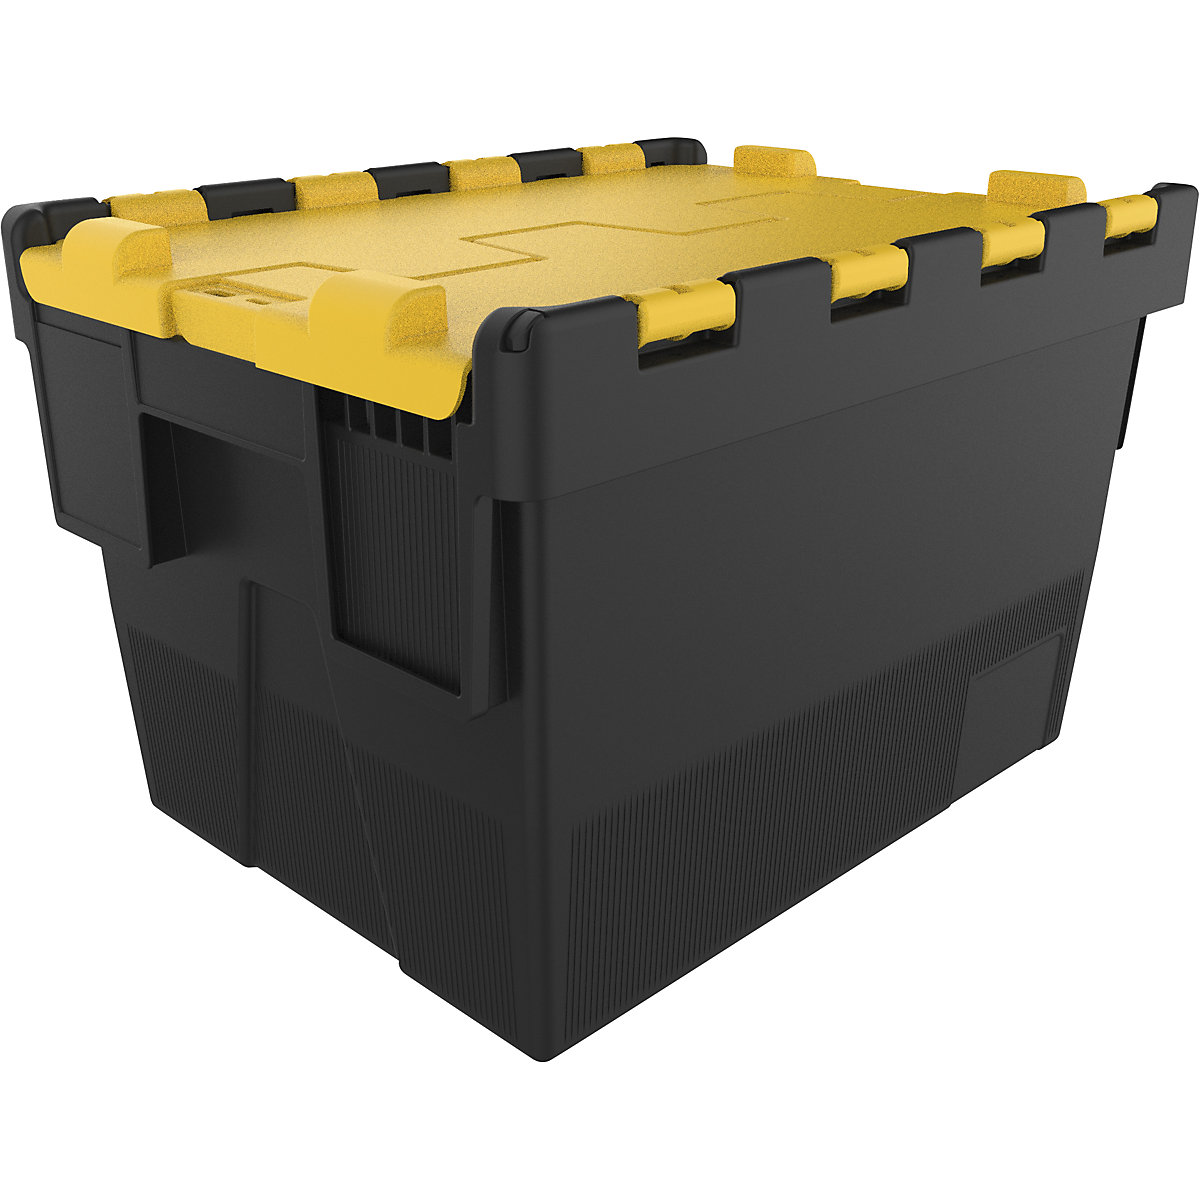 Reusable stacking container, LxWxH 400 x 300 x 264 mm, black/yellow-2